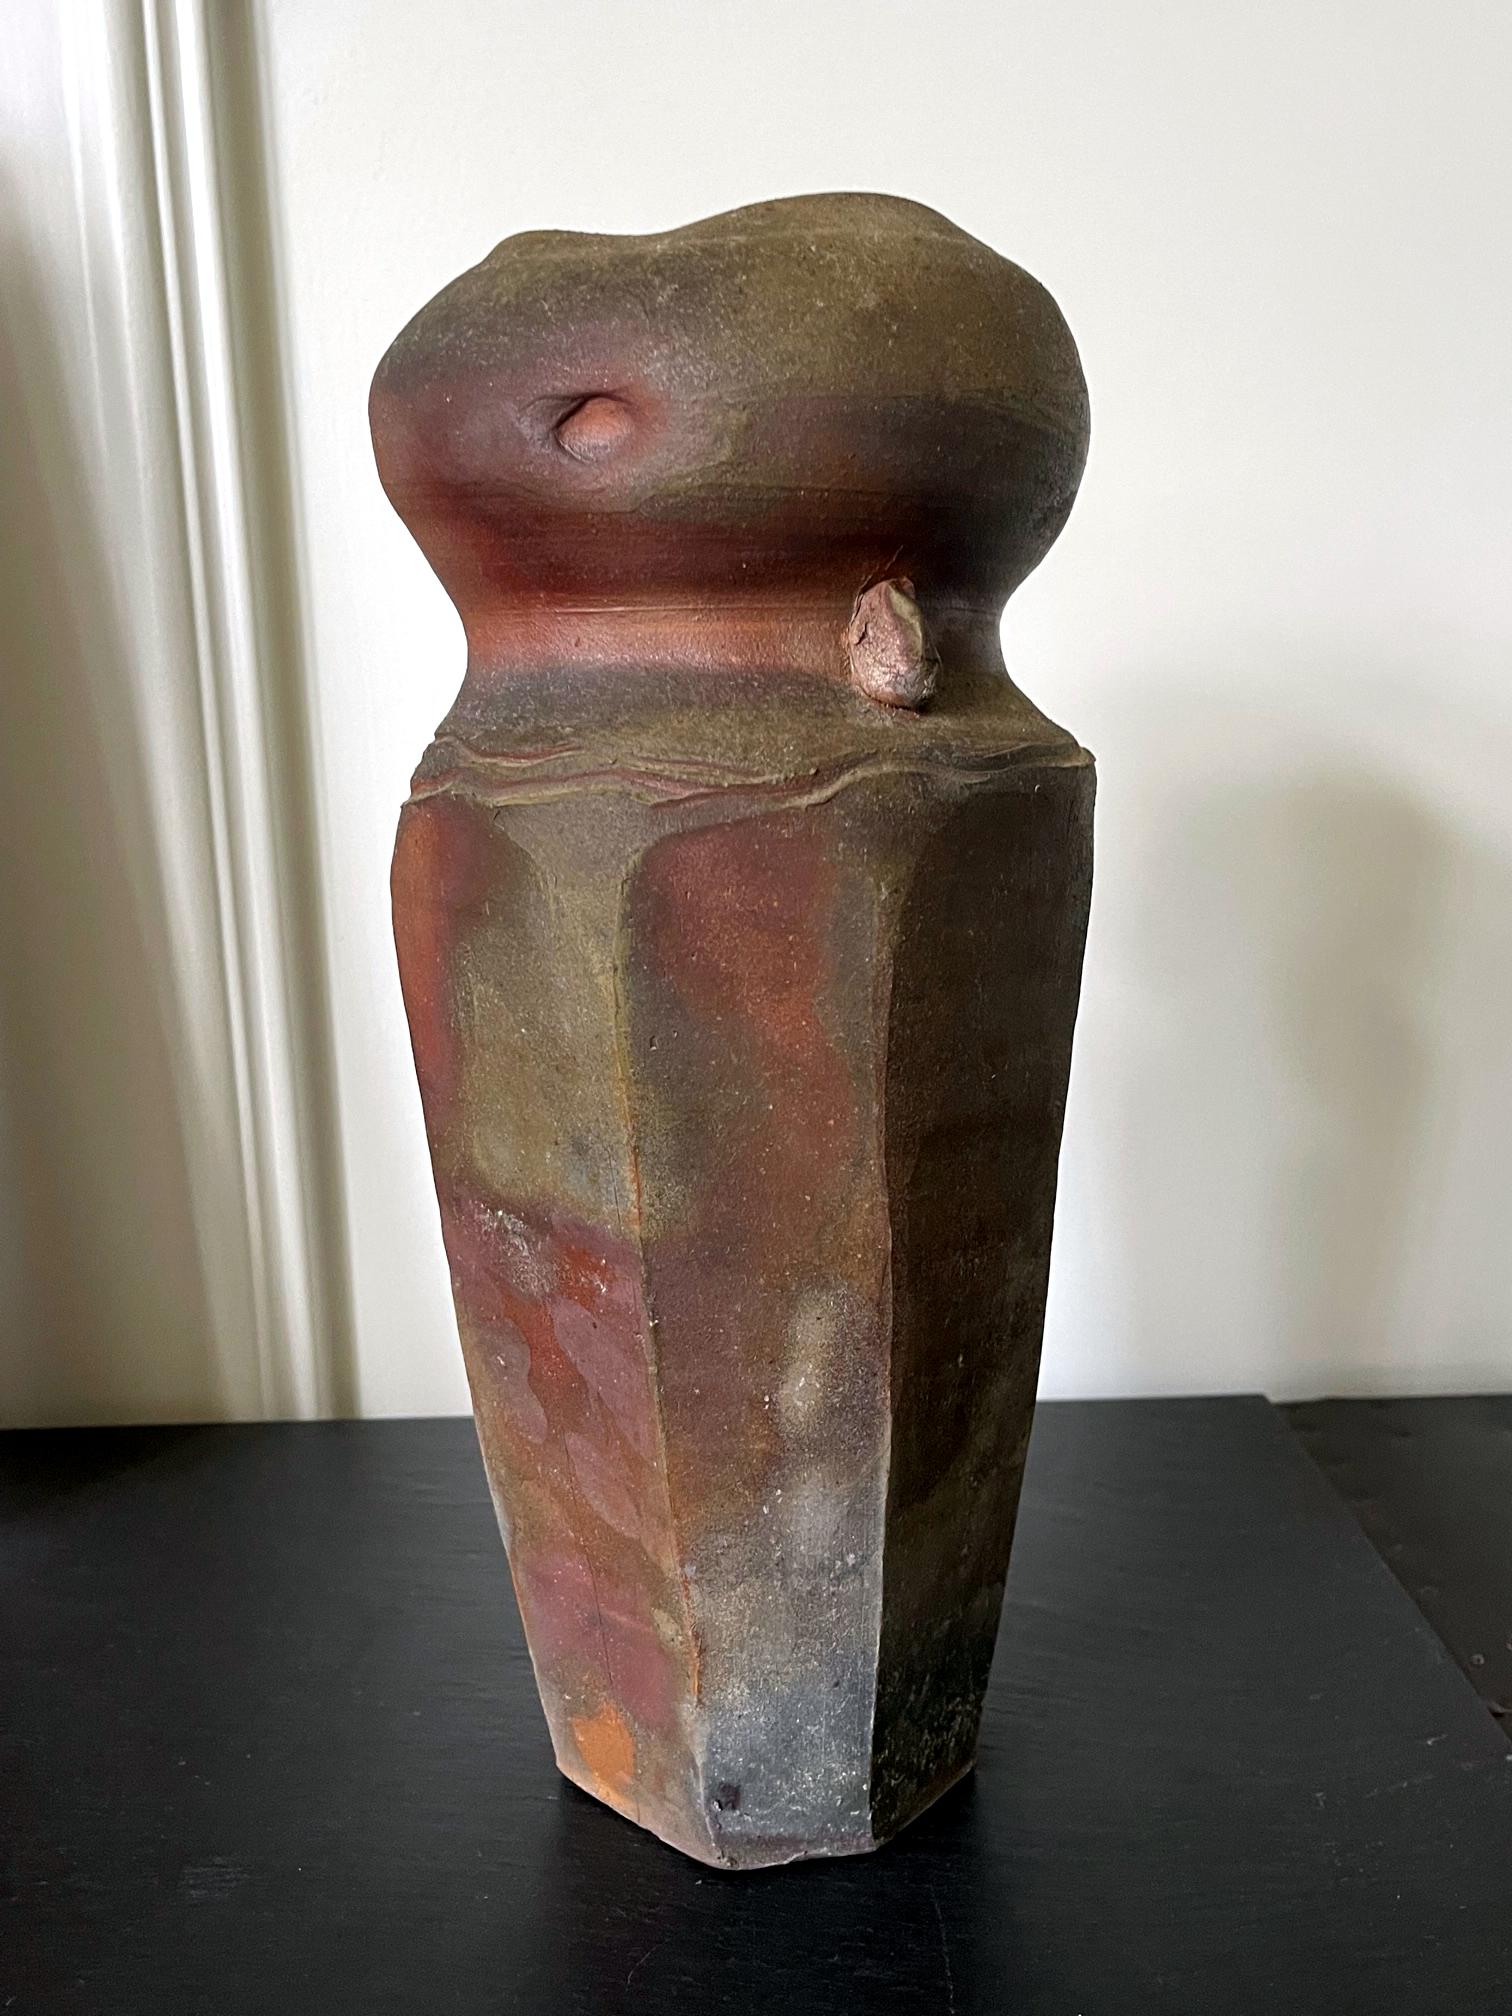 A stoneware vase by Paul Chaleff (1947-) made in 1984. Chaleff is known for his wood fired ceramic vessel without glaze or sometimes natural ash glaze. The vase on offer is of a highly geometrical form with handcut multifaceted lower body that rises